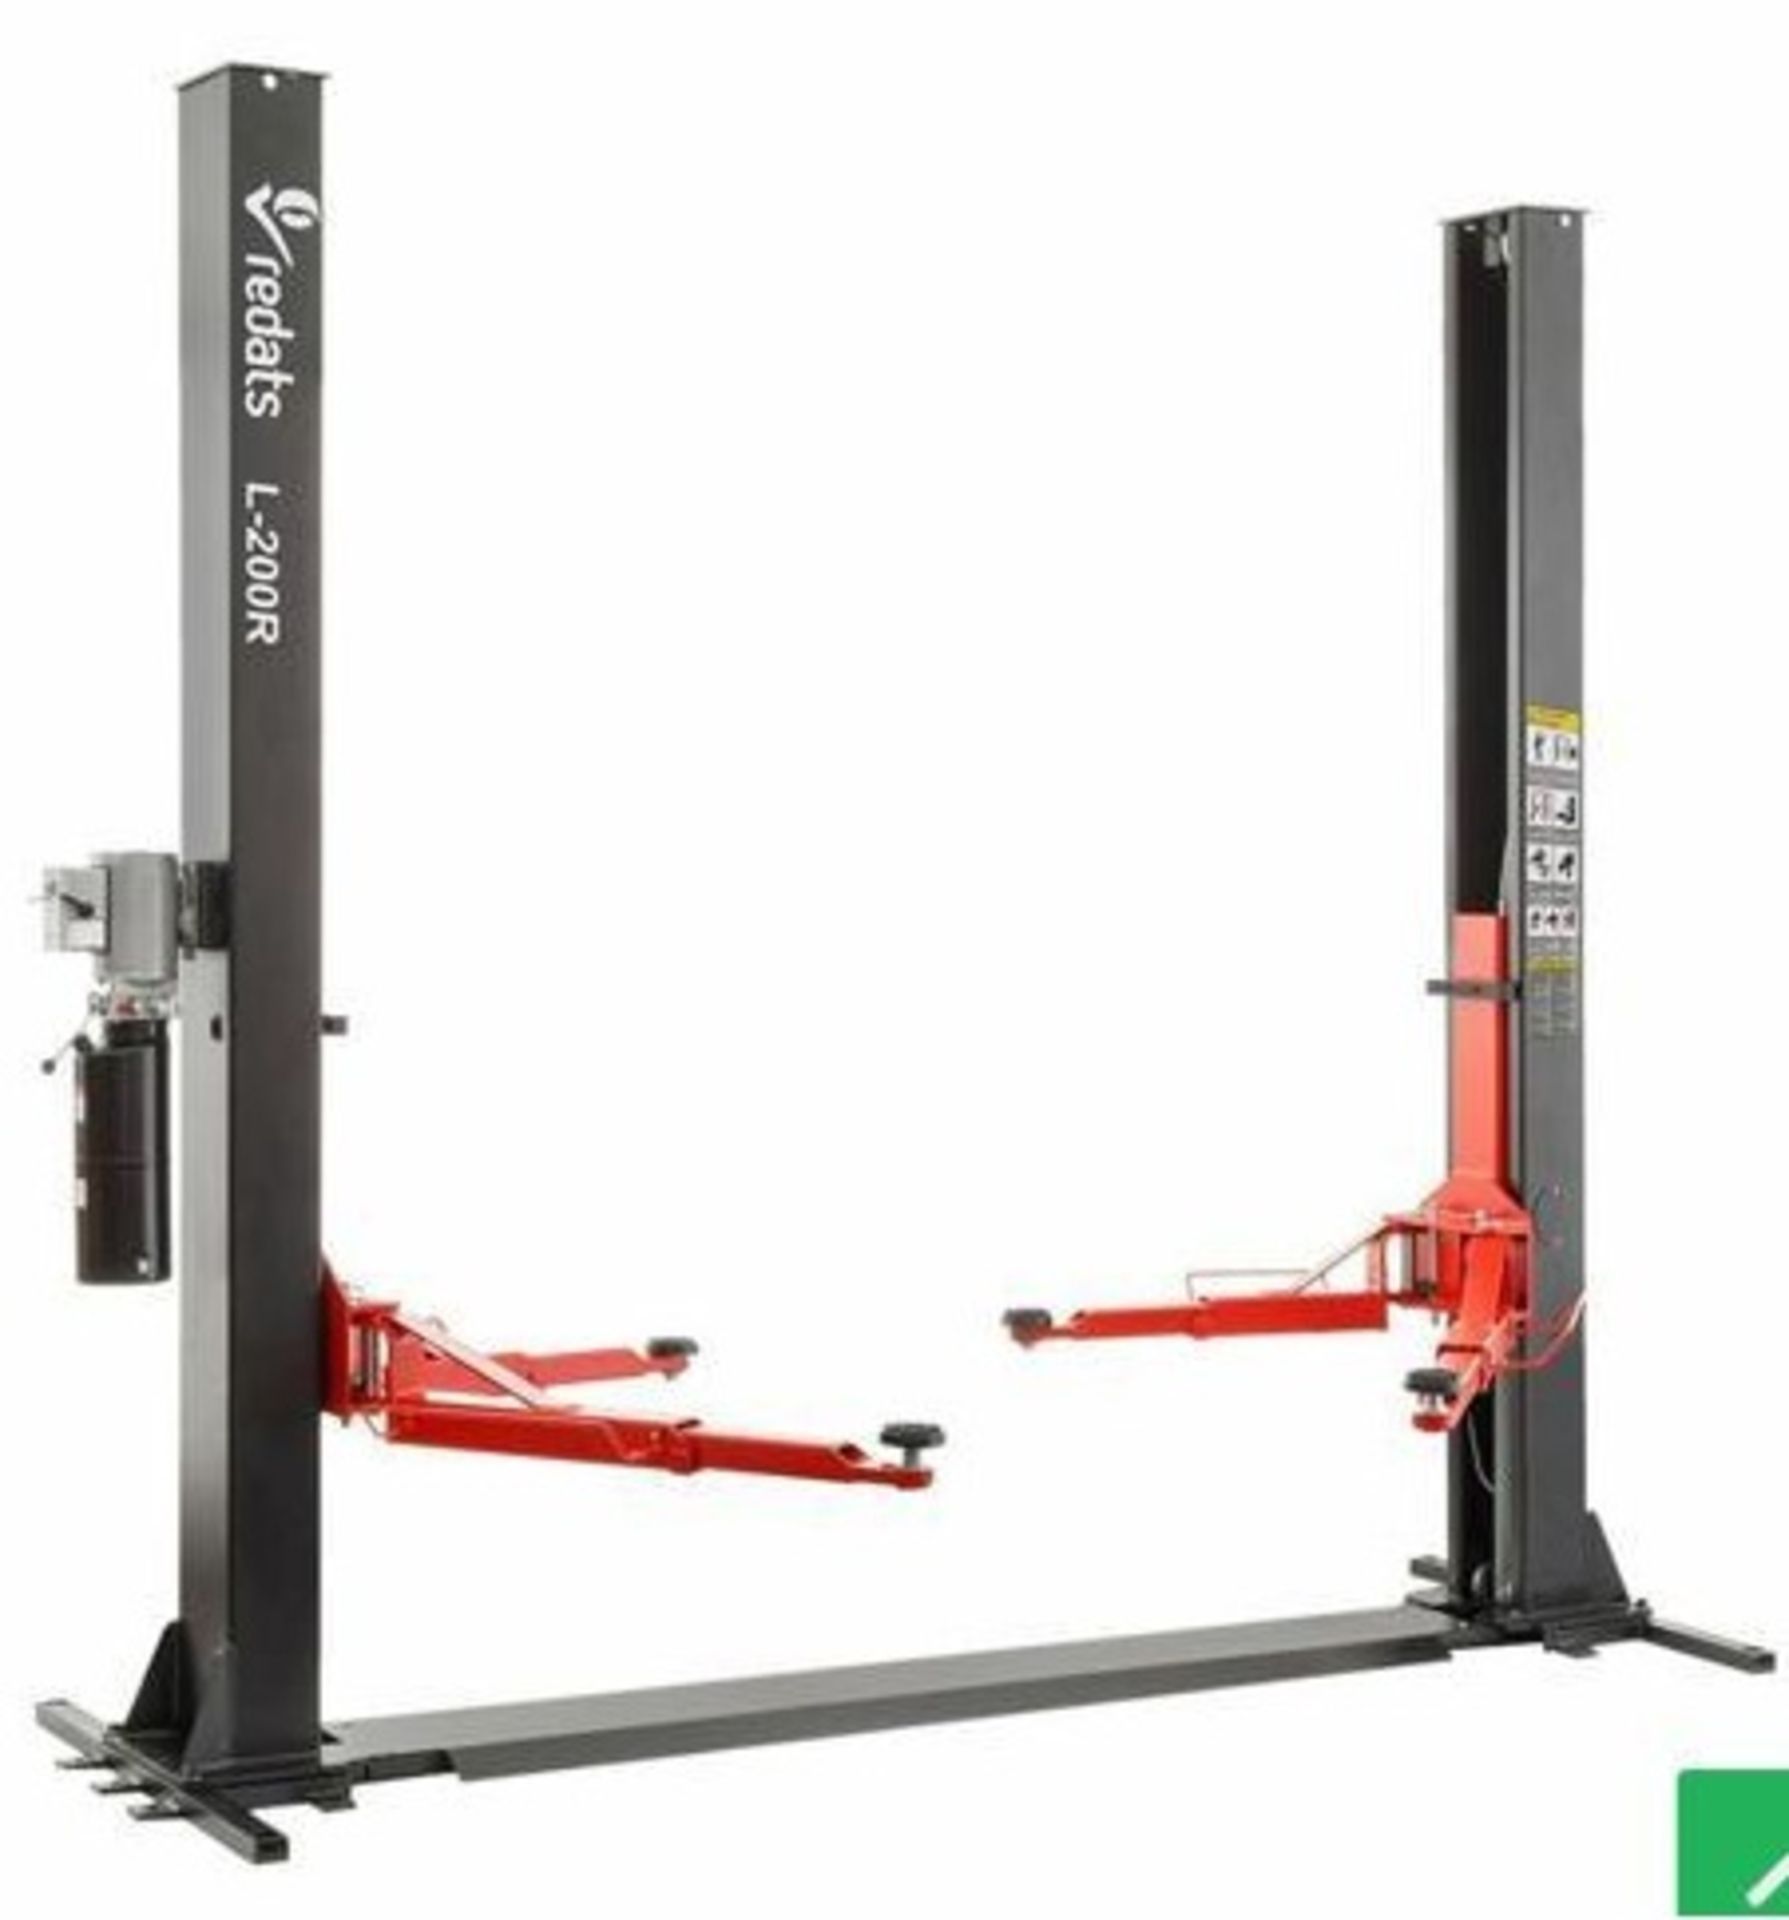 BRAND NEW ! REDATS L-200R MANUAL 4 TONNE 2 POST LIFT WITH BASE FRAME *PLUS VAT* - Image 2 of 10